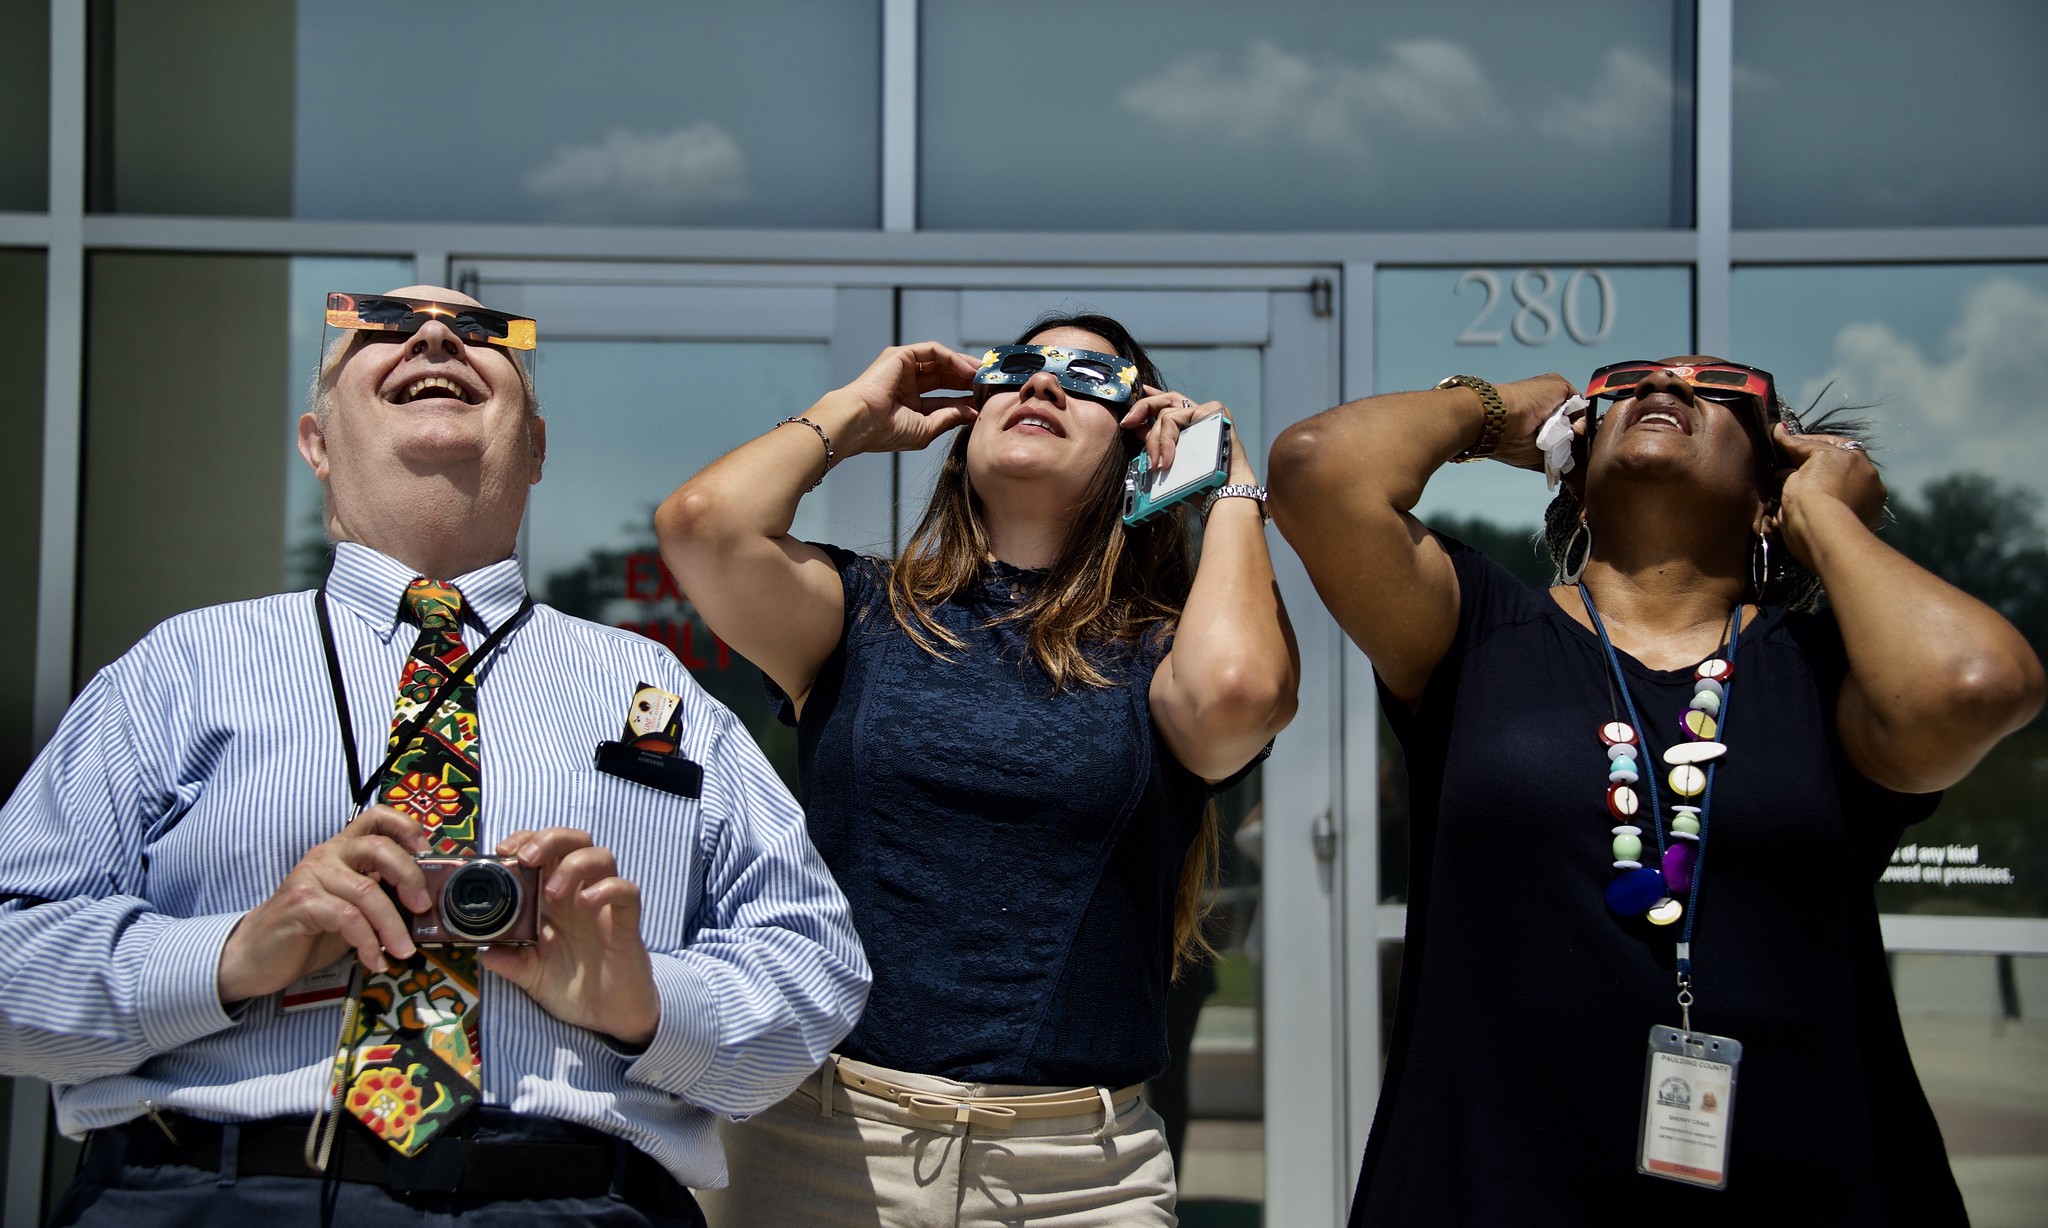 A Total Solar Eclipse is a Once in a Lifetime Opportunity